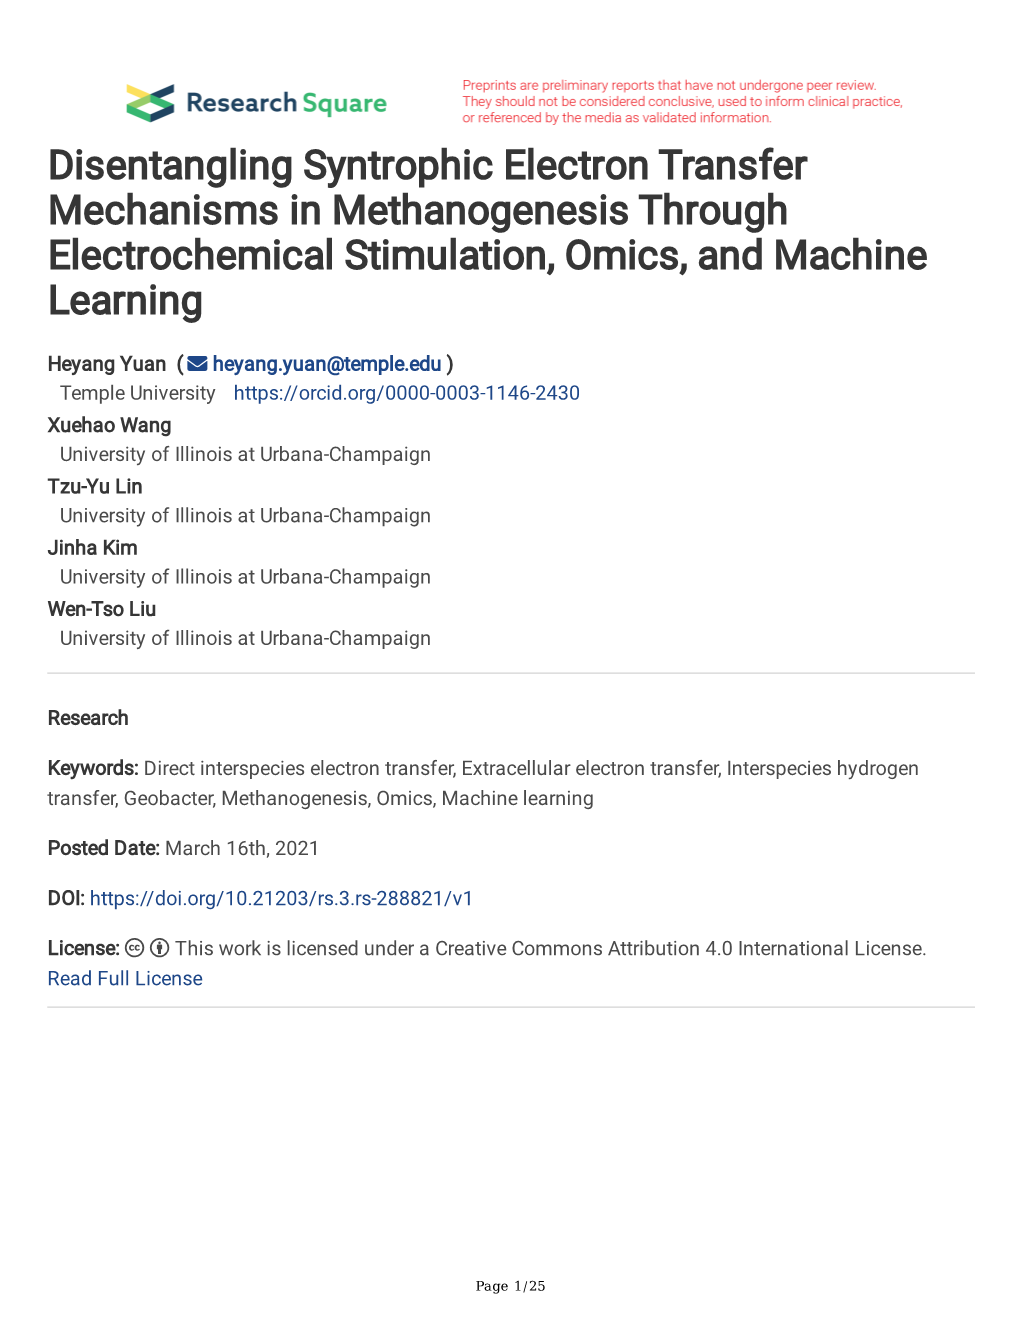 Disentangling Syntrophic Electron Transfer Mechanisms in Methanogenesis Through Electrochemical Stimulation, Omics, and Machine Learning